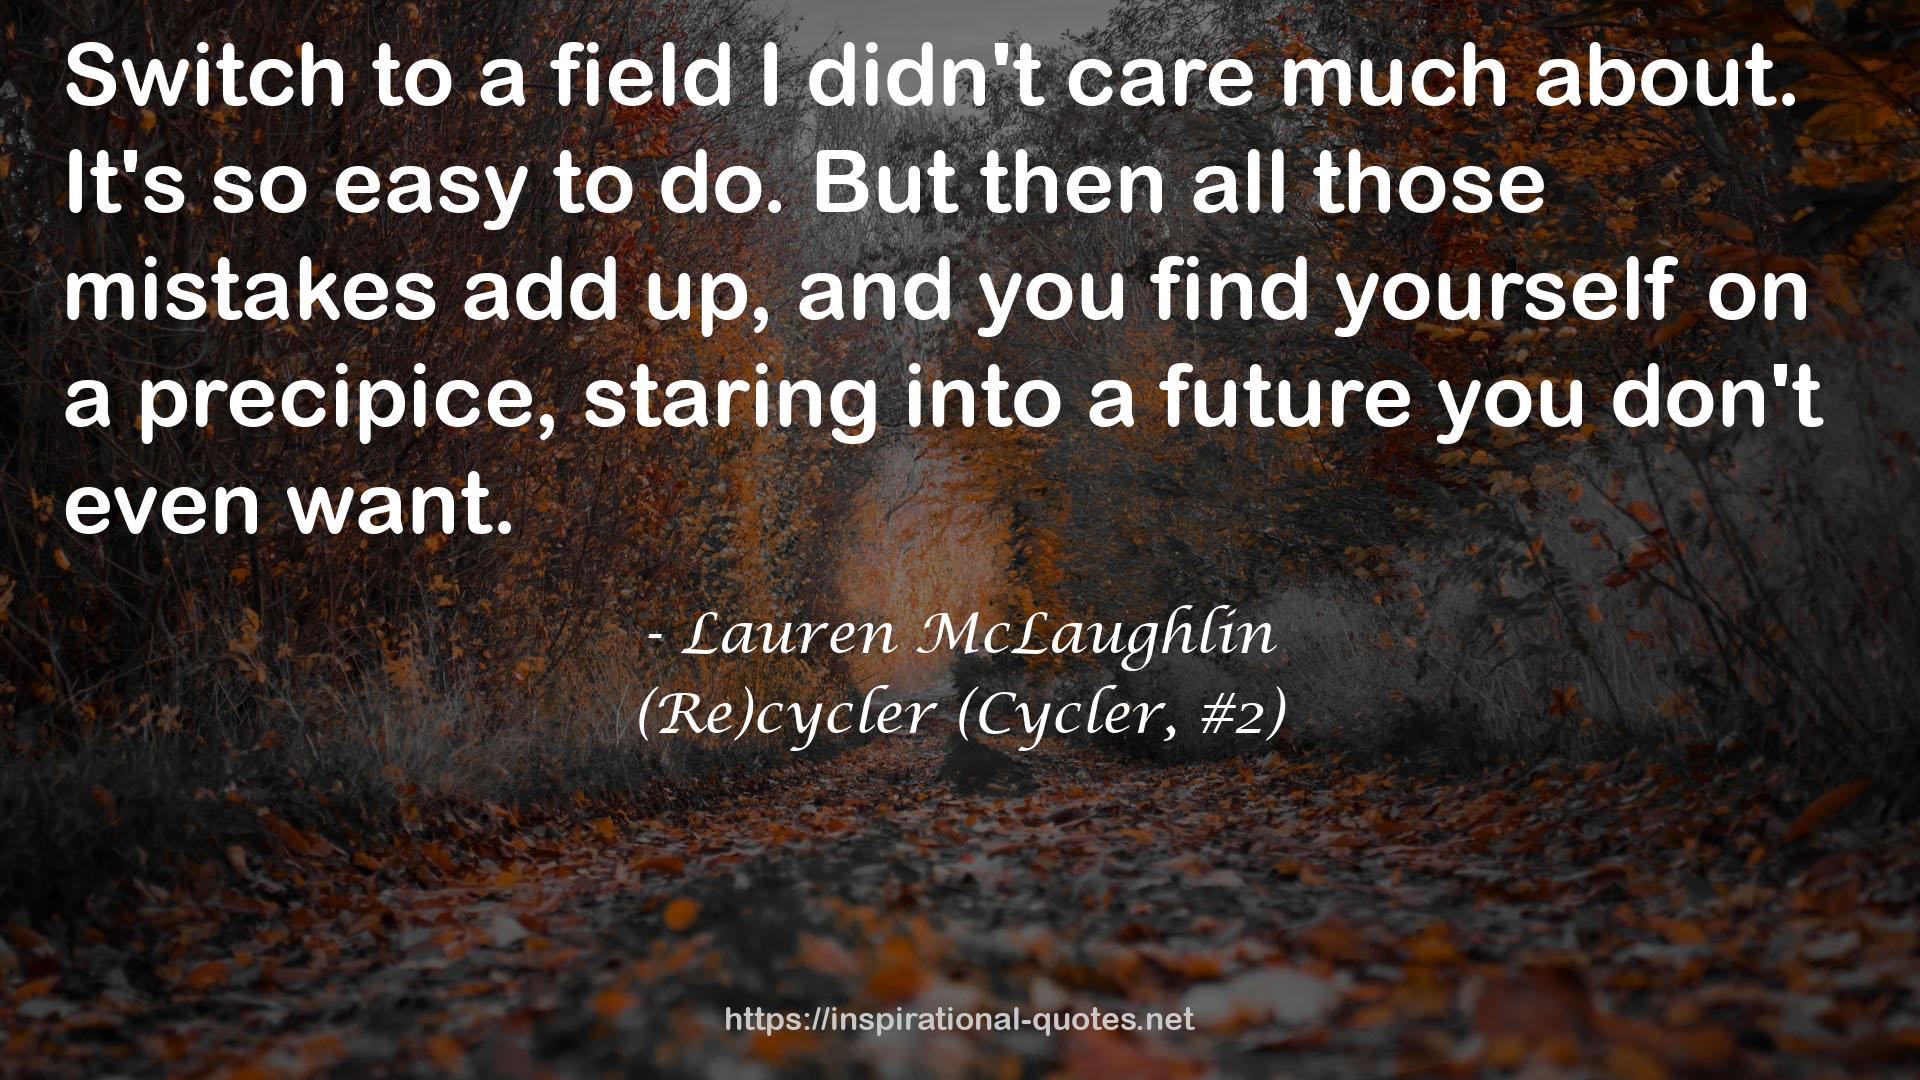 (Re)cycler (Cycler, #2) QUOTES